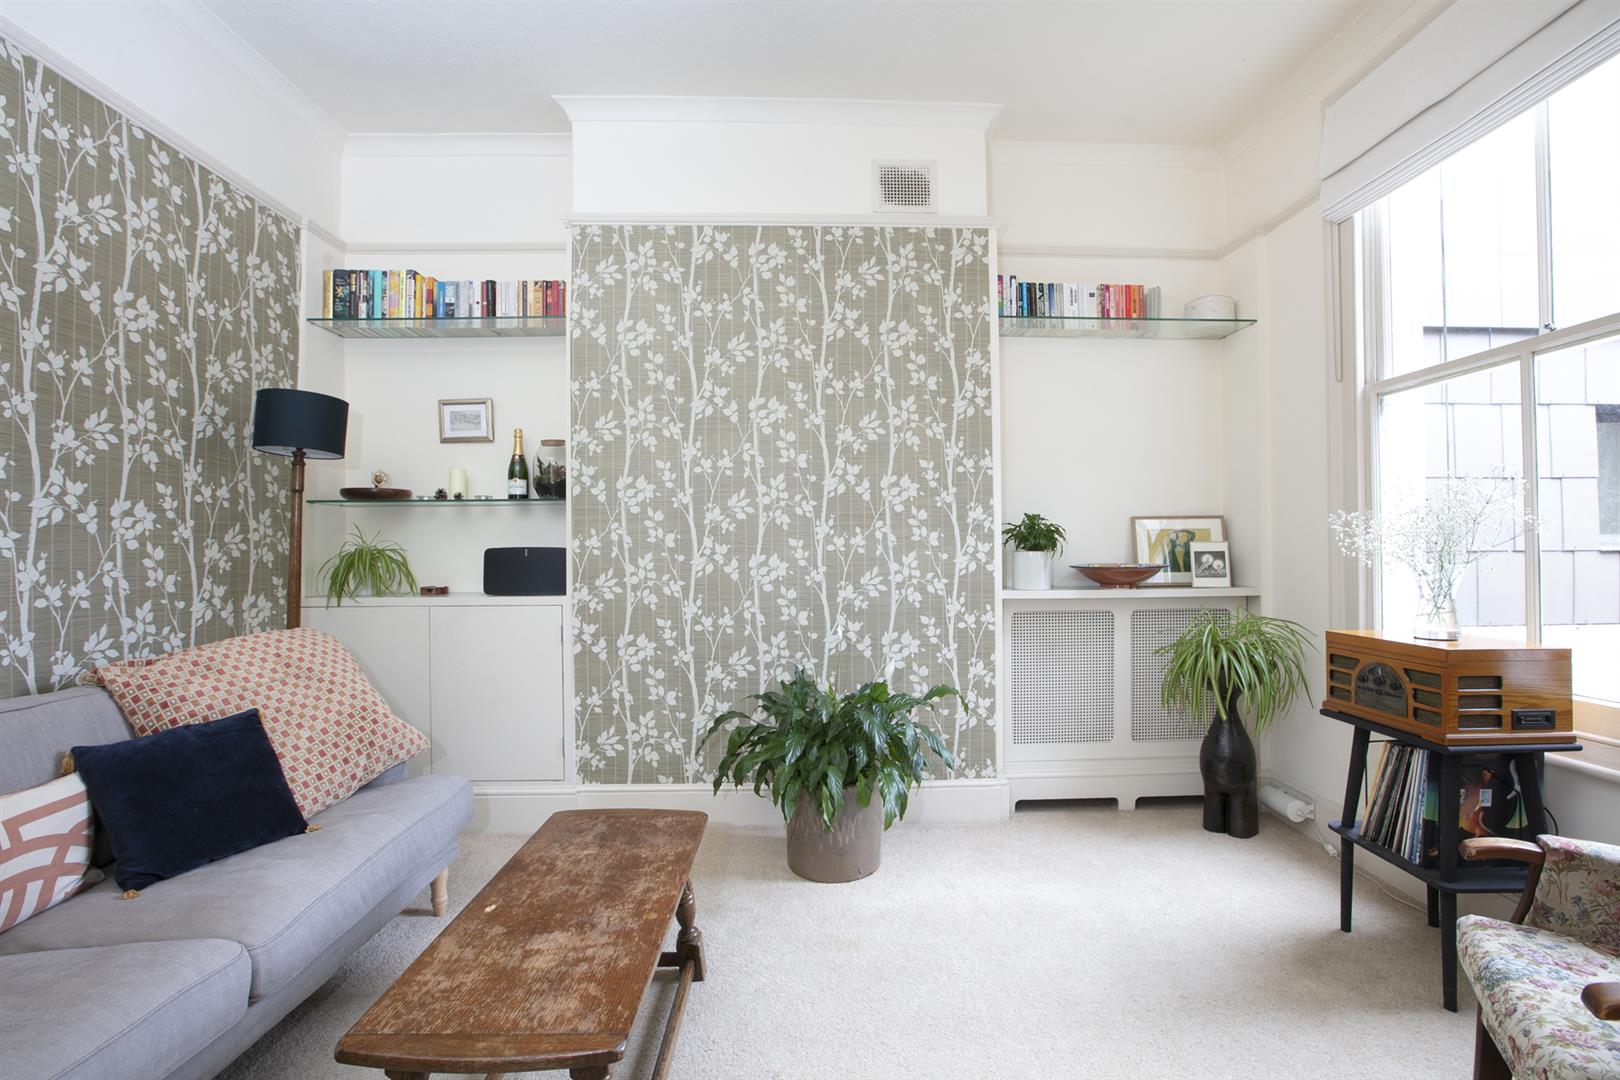 Flat - Conversion Sold in Peckham Road, Camberwell, SE5 859 view4